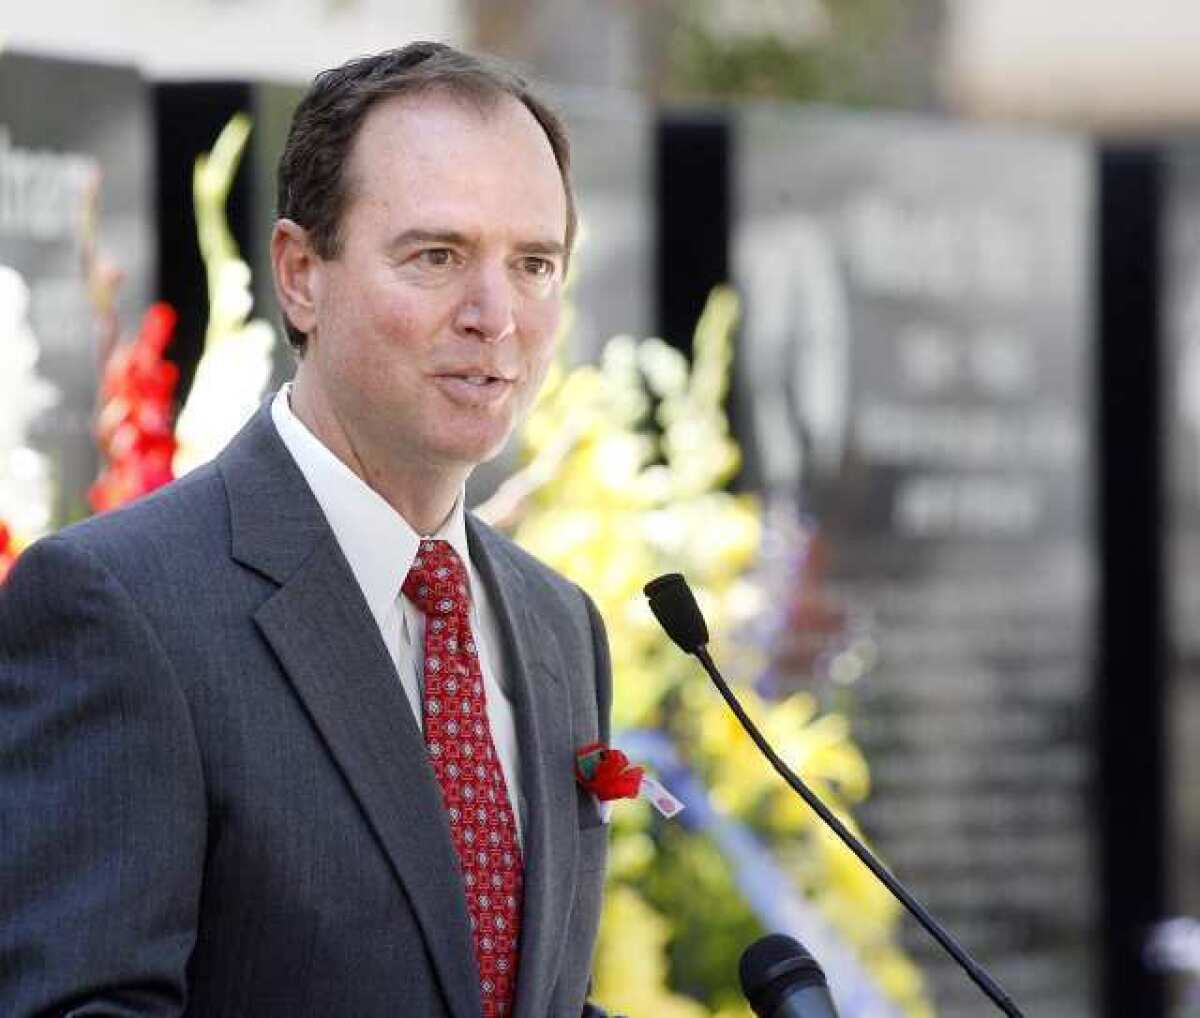 Rep. Adam Schiff (D-Burbank) sent a letter to regional transportation officials on Thursday, Sept. 20, 2012, opposing the proposal to build a 4.5-mile tunnel connecting the Long Beach (710) Freeway in Alhambra to the Foothill (210) Freeway in Pasadena.